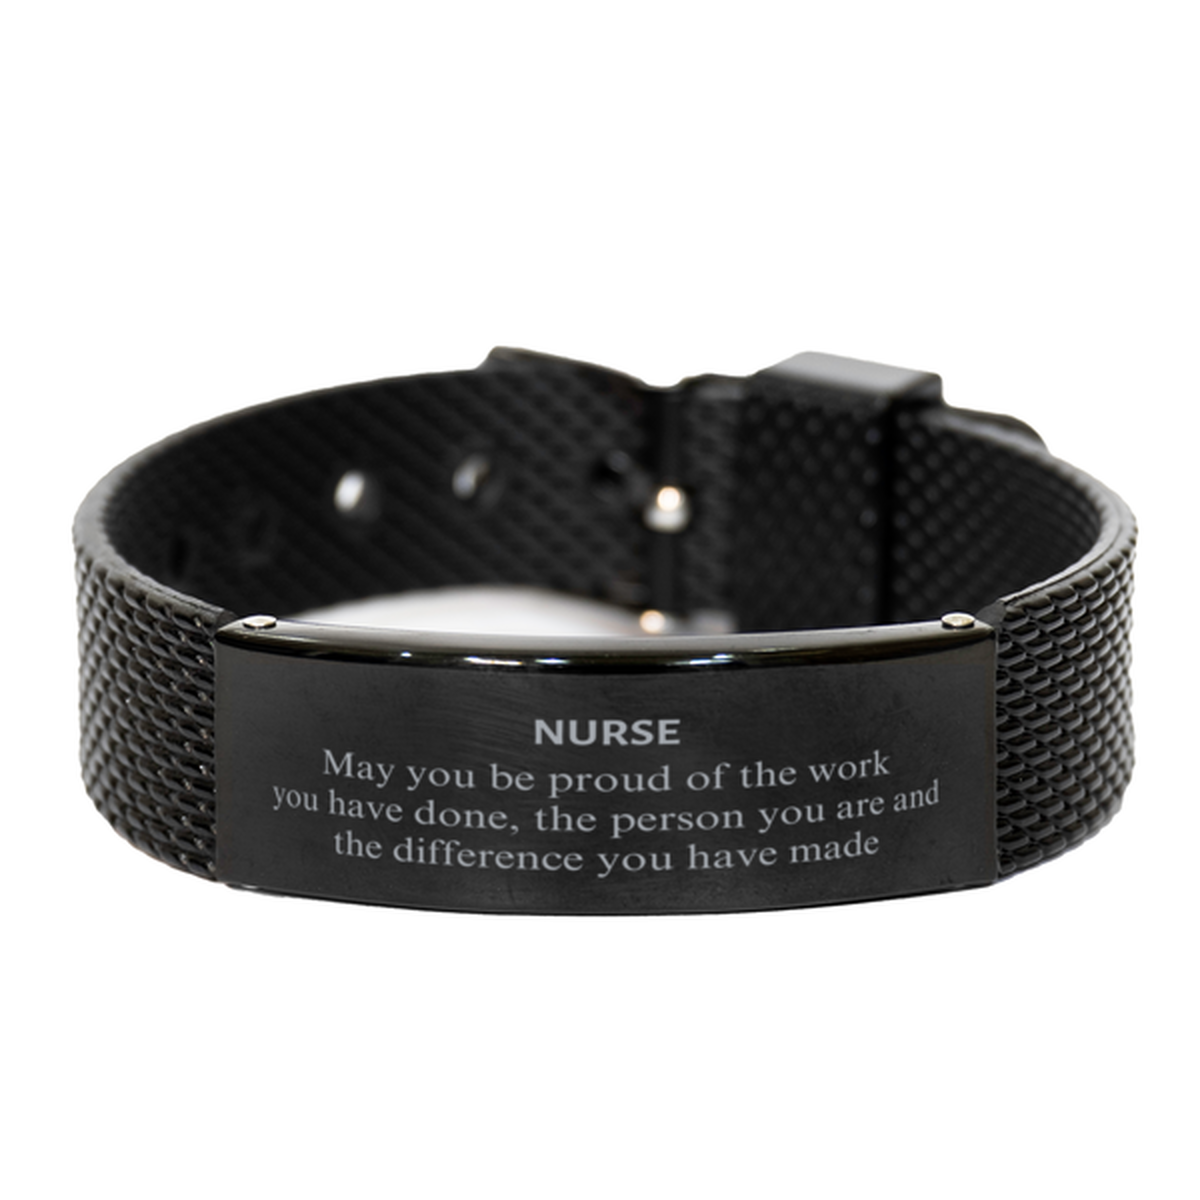 Nurse May you be proud of the work you have done, Retirement Nurse Black Shark Mesh Bracelet for Colleague Appreciation Gifts Amazing for Nurse